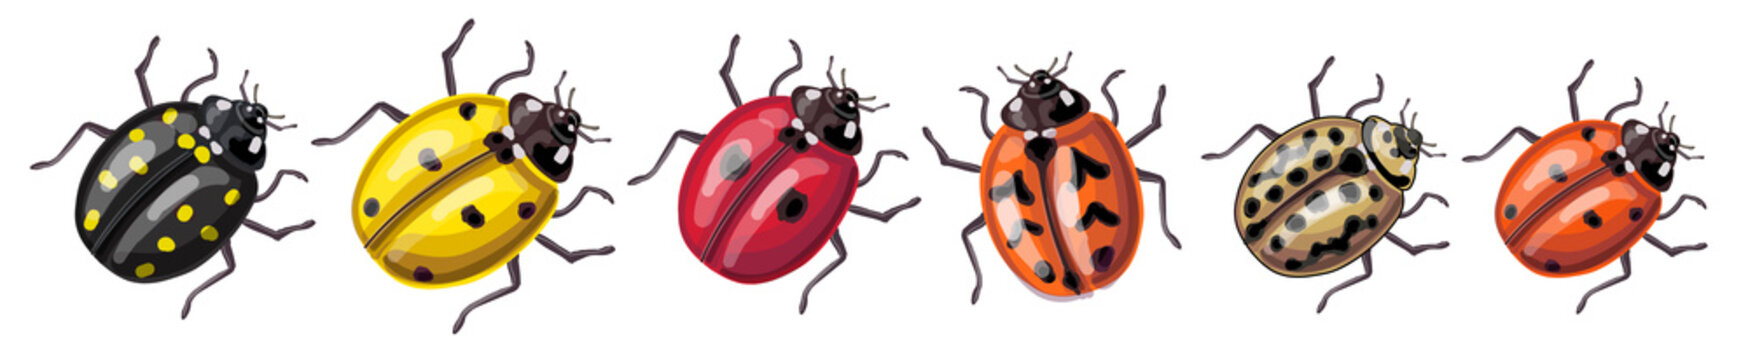 Set of insects - ladybugs of different colors and species: yellow, red, orange, black, cream. Drawing isolated on a white background. Stock vector illustration.